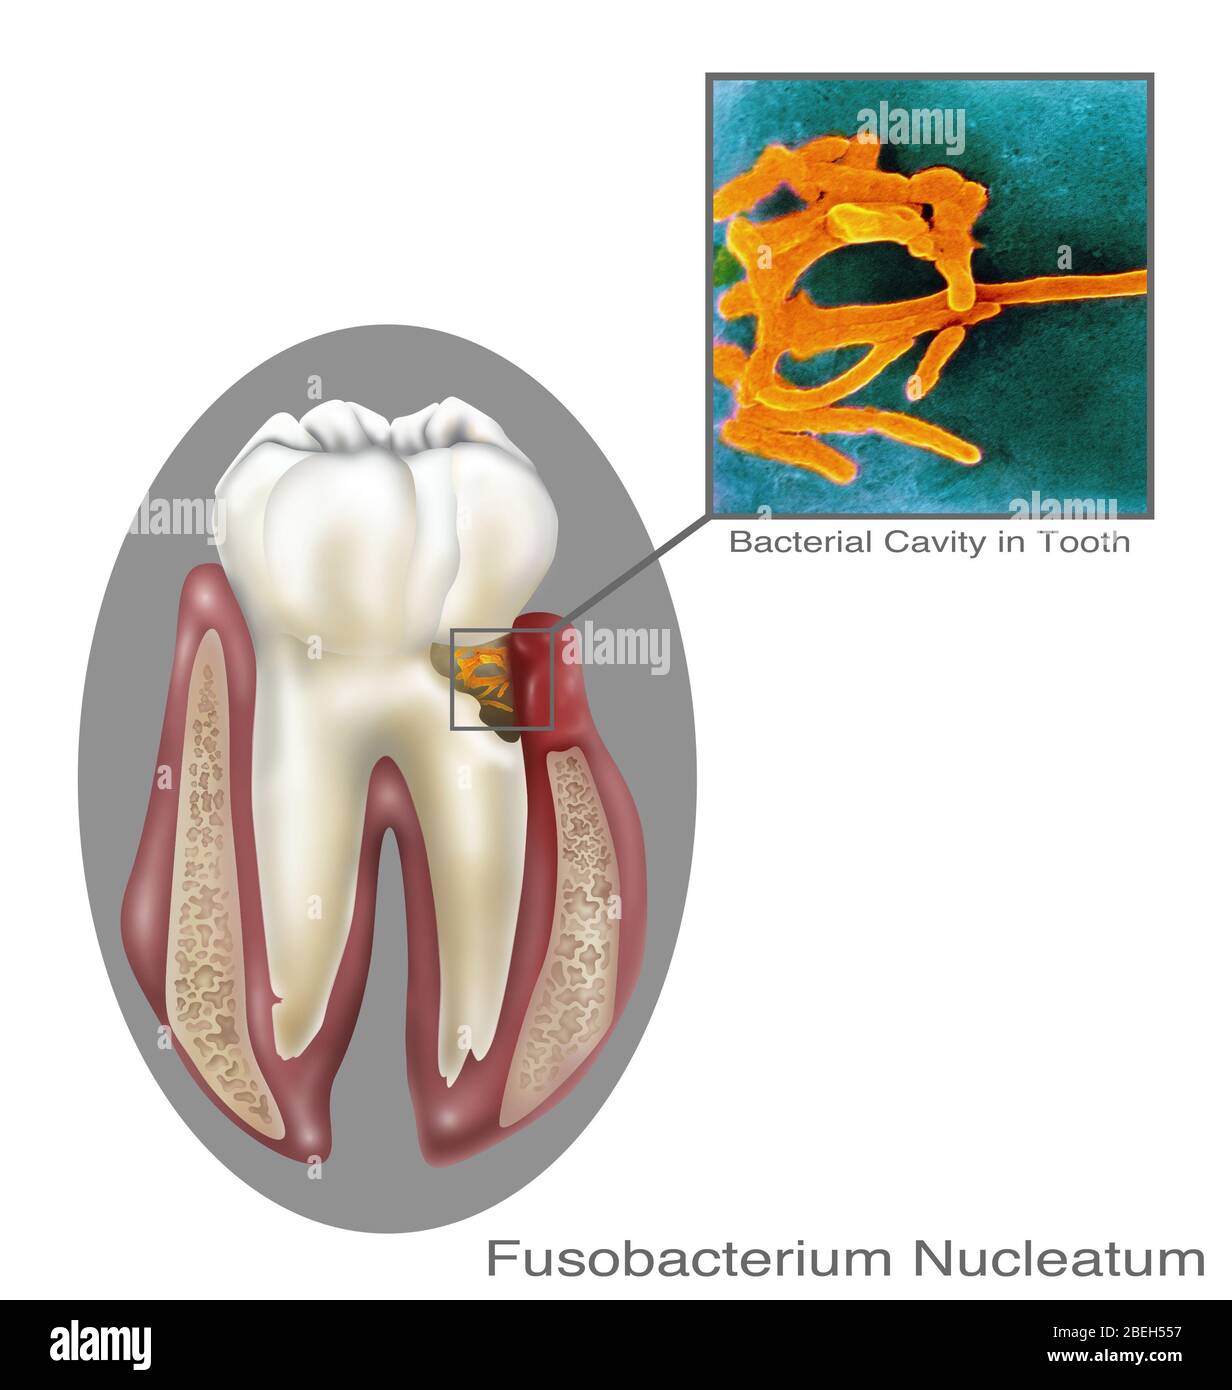 Oral Infection of Fusobacterium Nucleatum Stock Photo